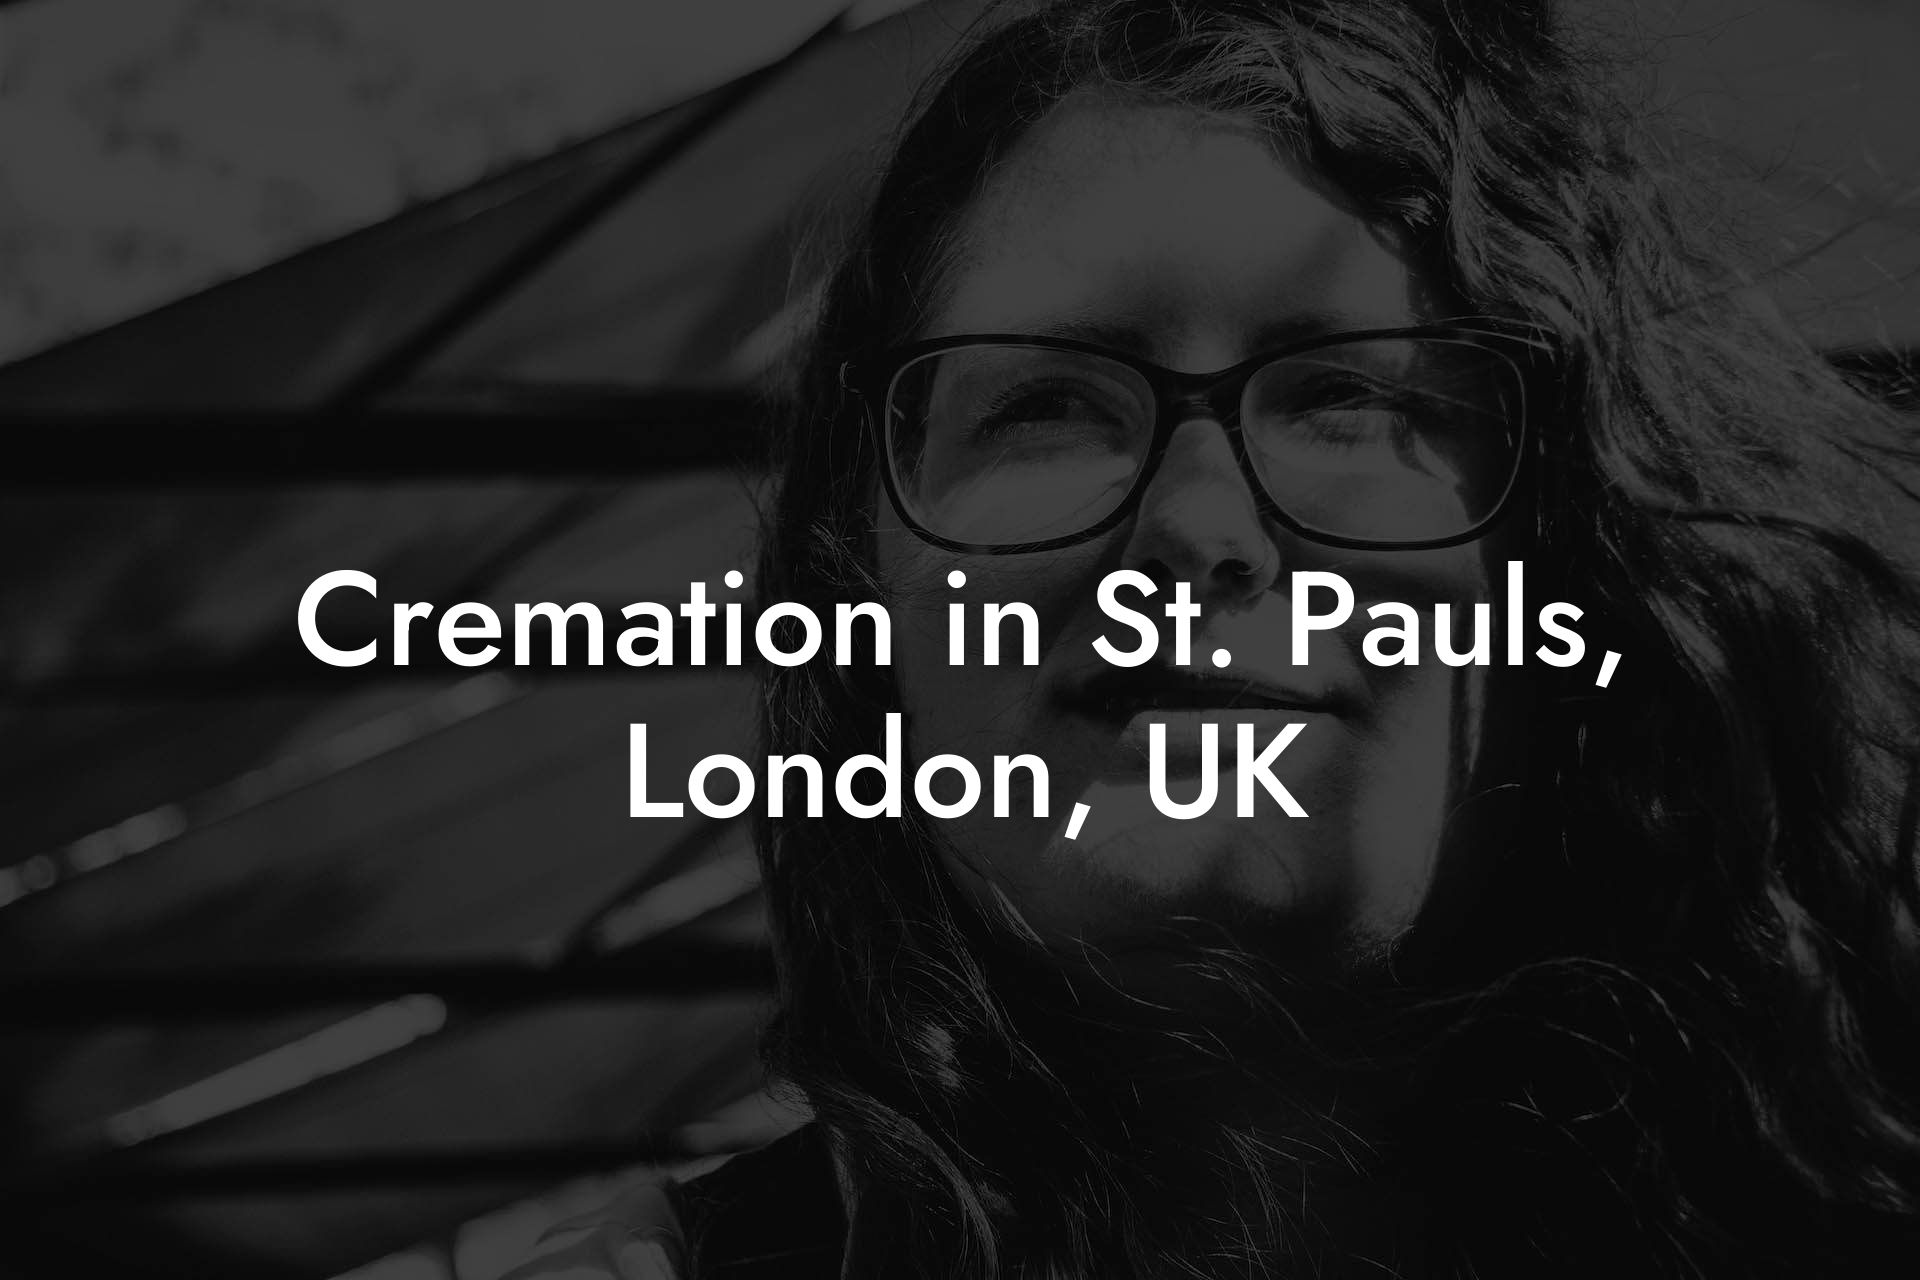 Cremation in St. Pauls, London, UK